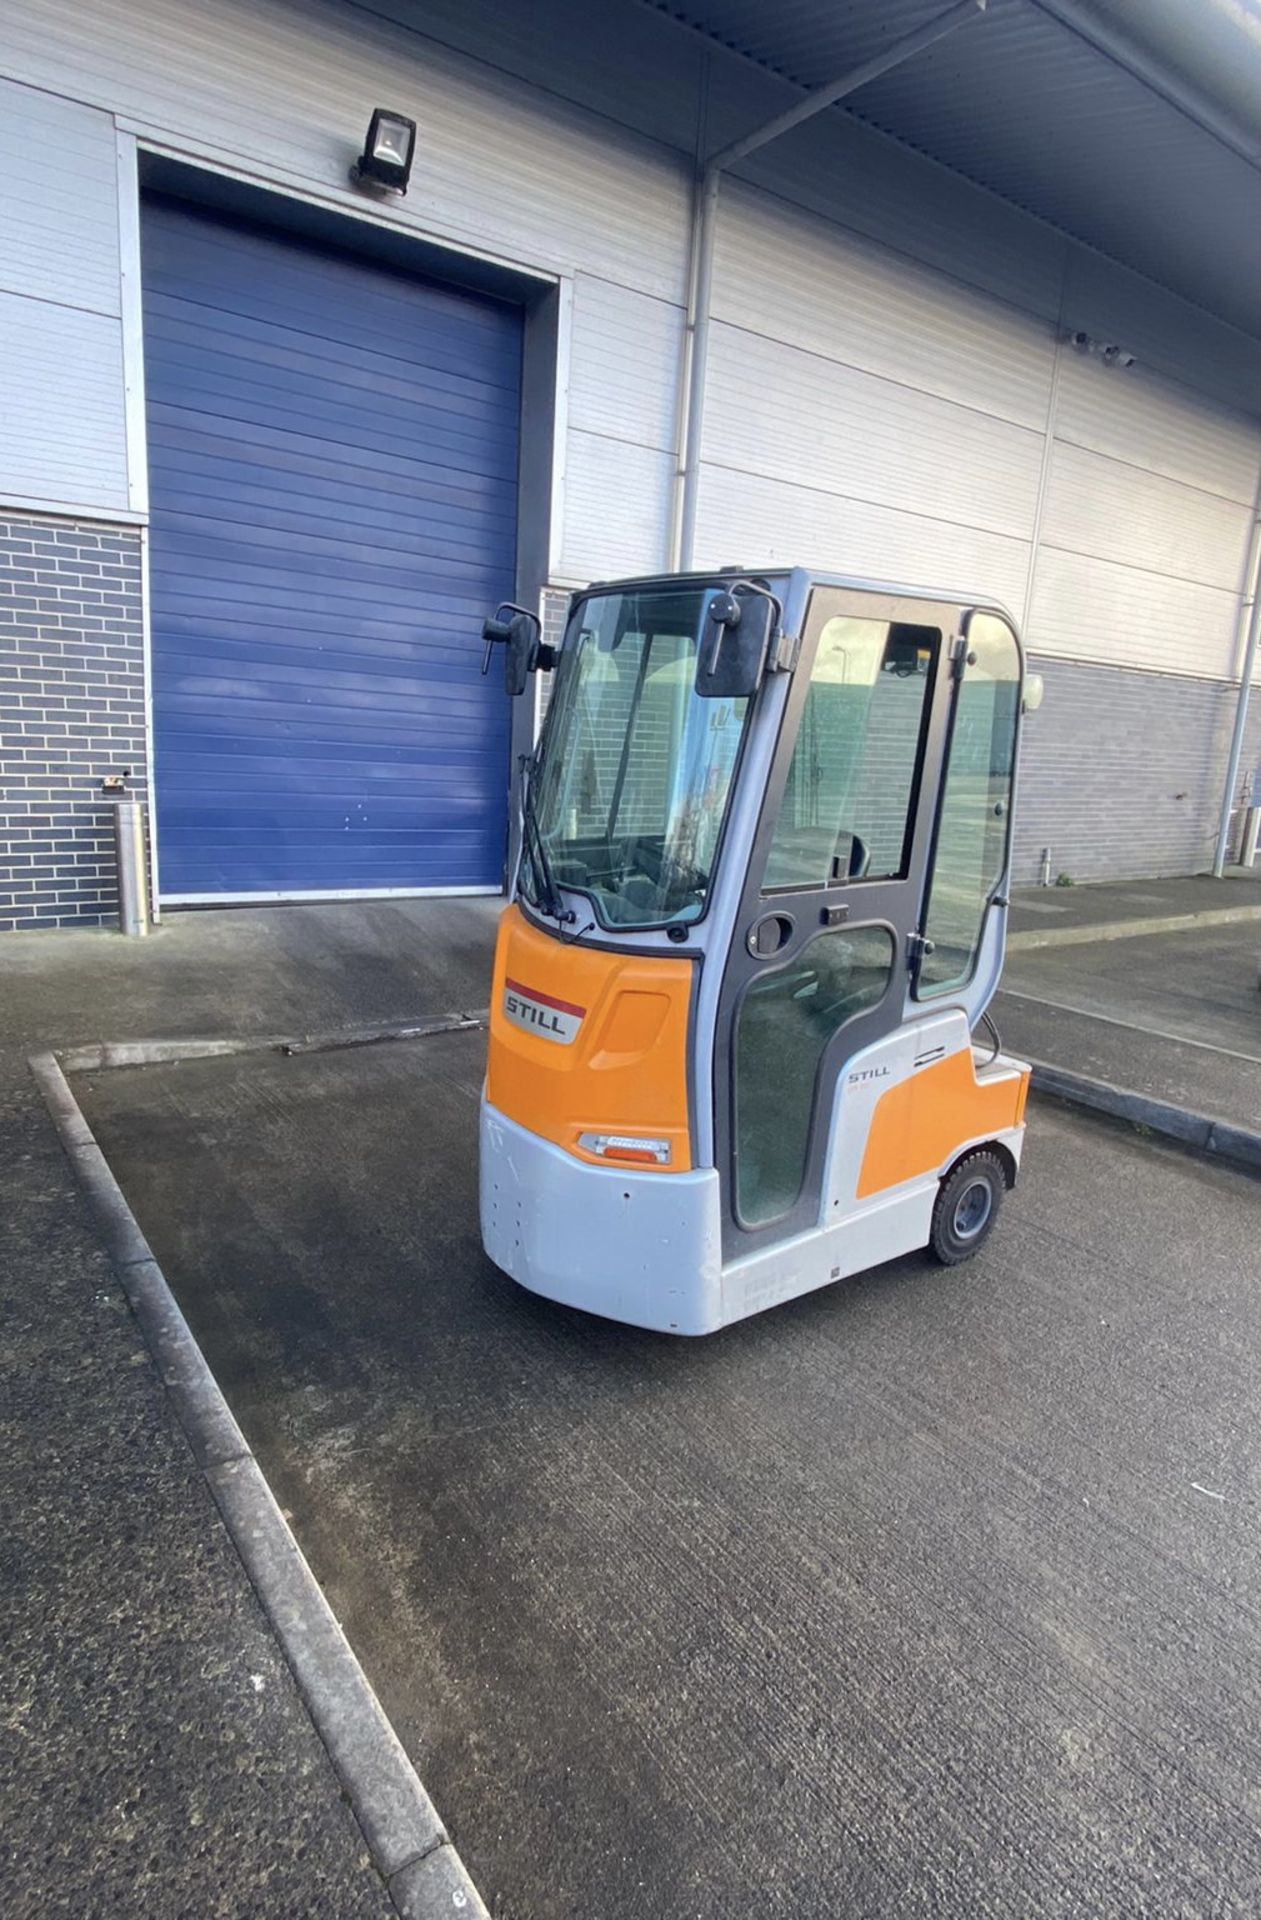 Still LTX 70 ELECTRIC TRACTOR/ TRANSPORTER, serial no. W40608F00386, year of manufacture 2015,